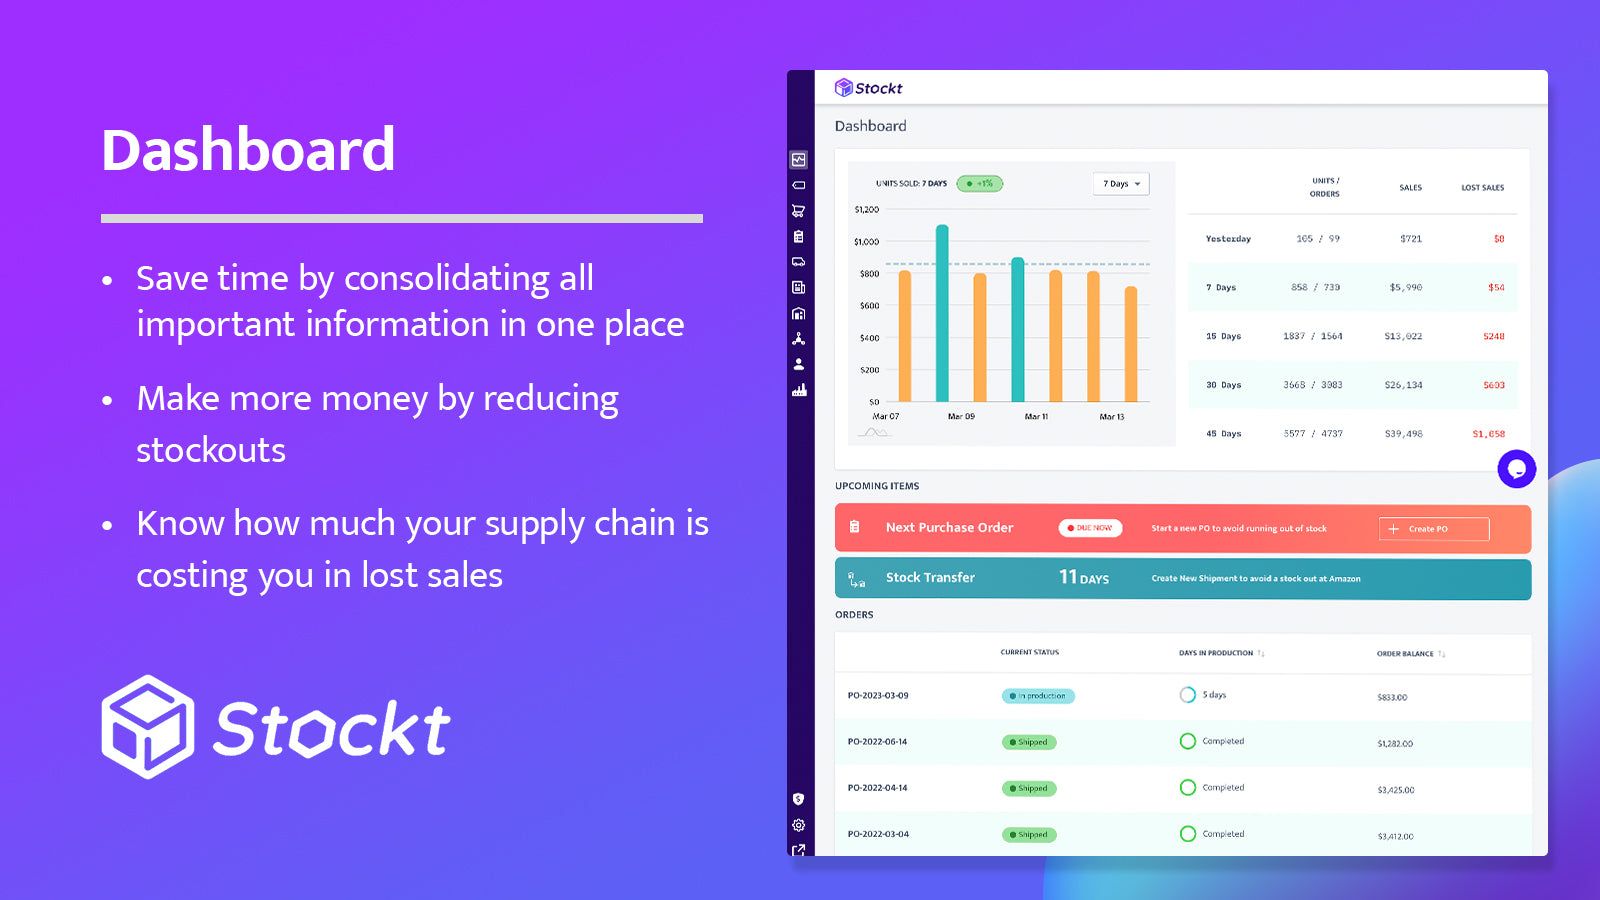 Stockt Dashboard gives business snapshot